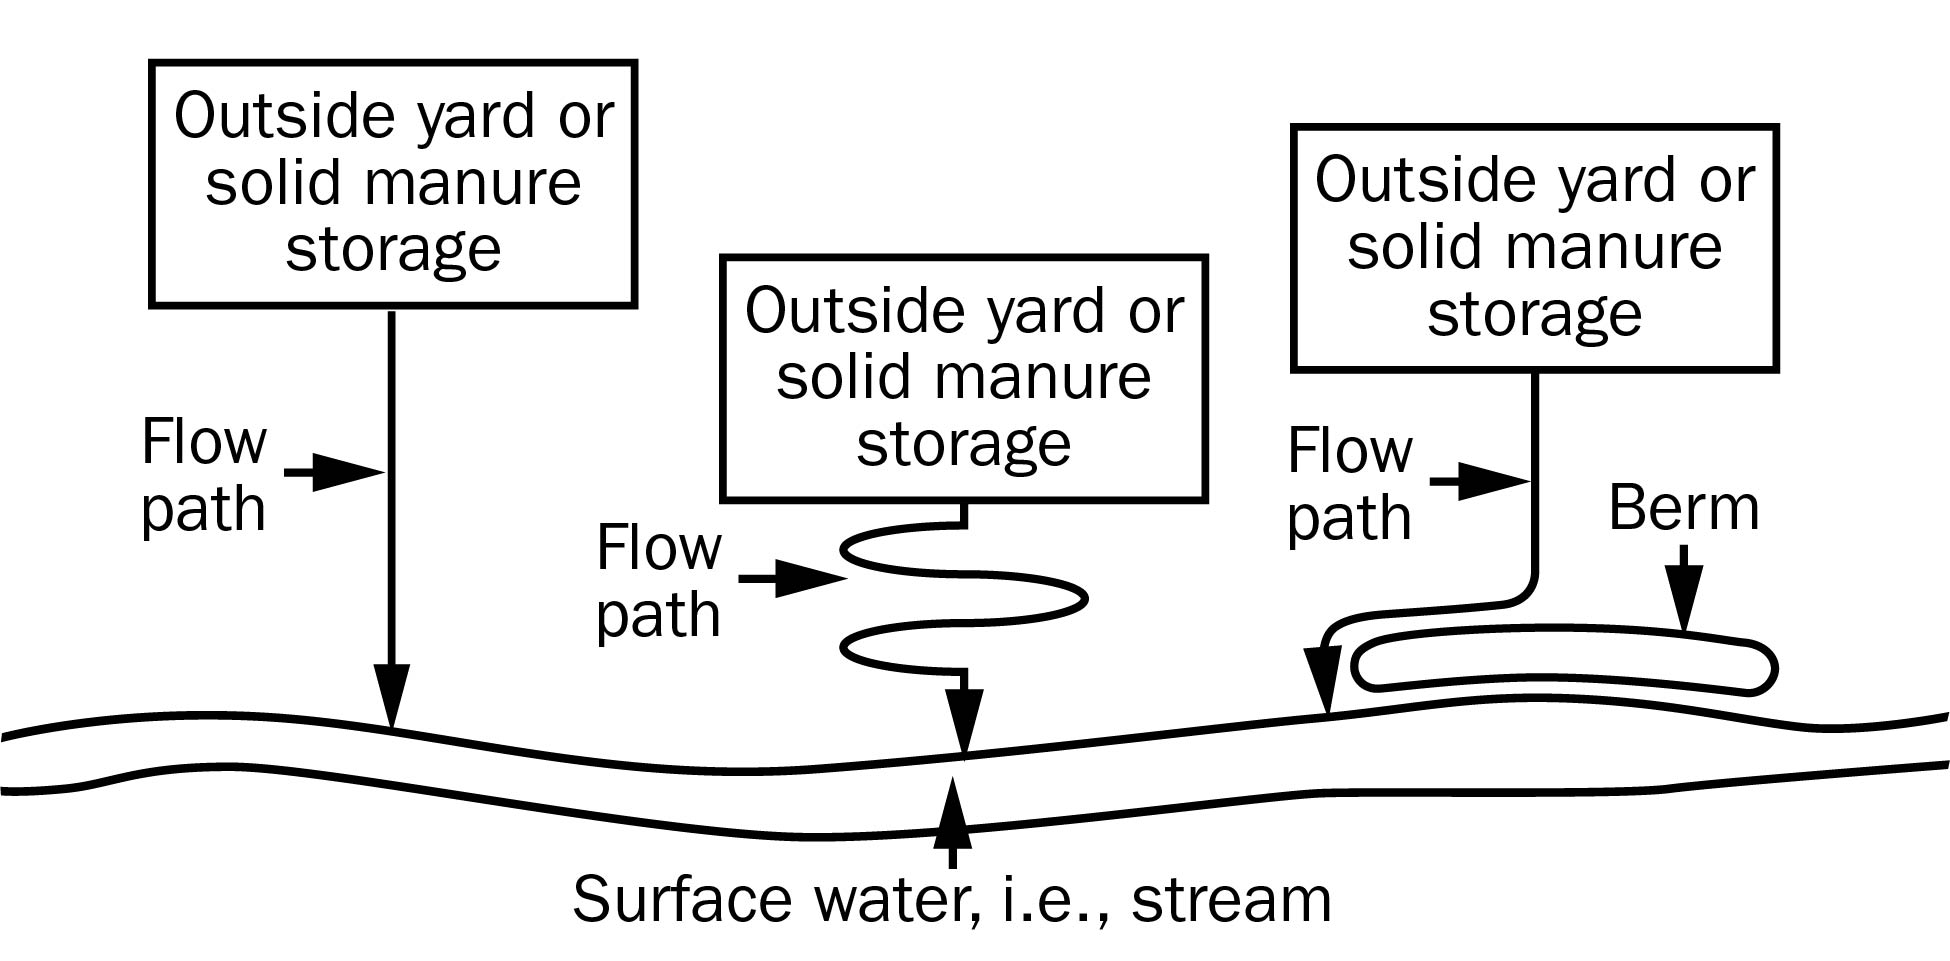 Different flow paths of the same required length